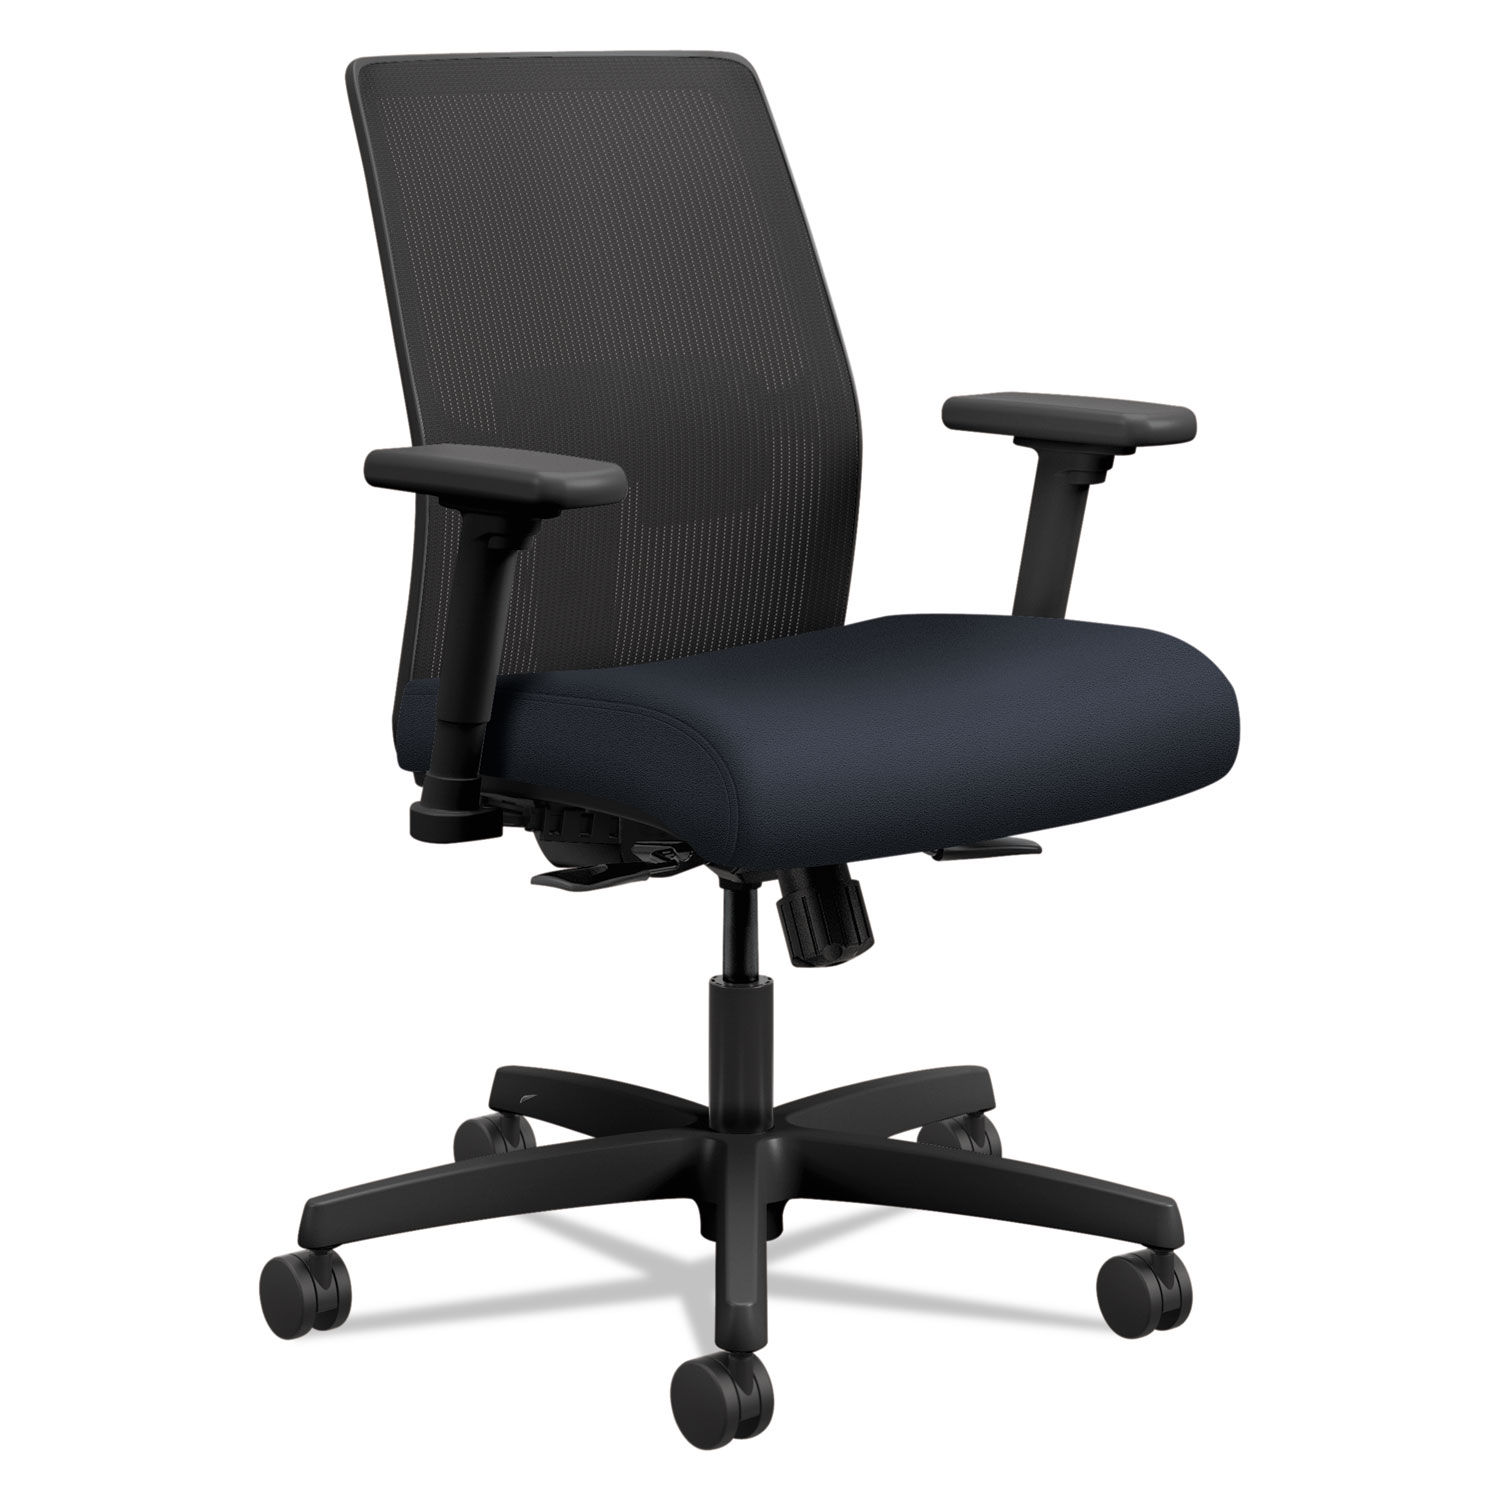  HON HONI2L1AMLC98TK Ignition 2.0 4-Way Stretch Low-Back Mesh Task Chair, Supports up to 300 lbs., Navy Seat, Black Back/Base (HONI2L1AMLC98TK) 